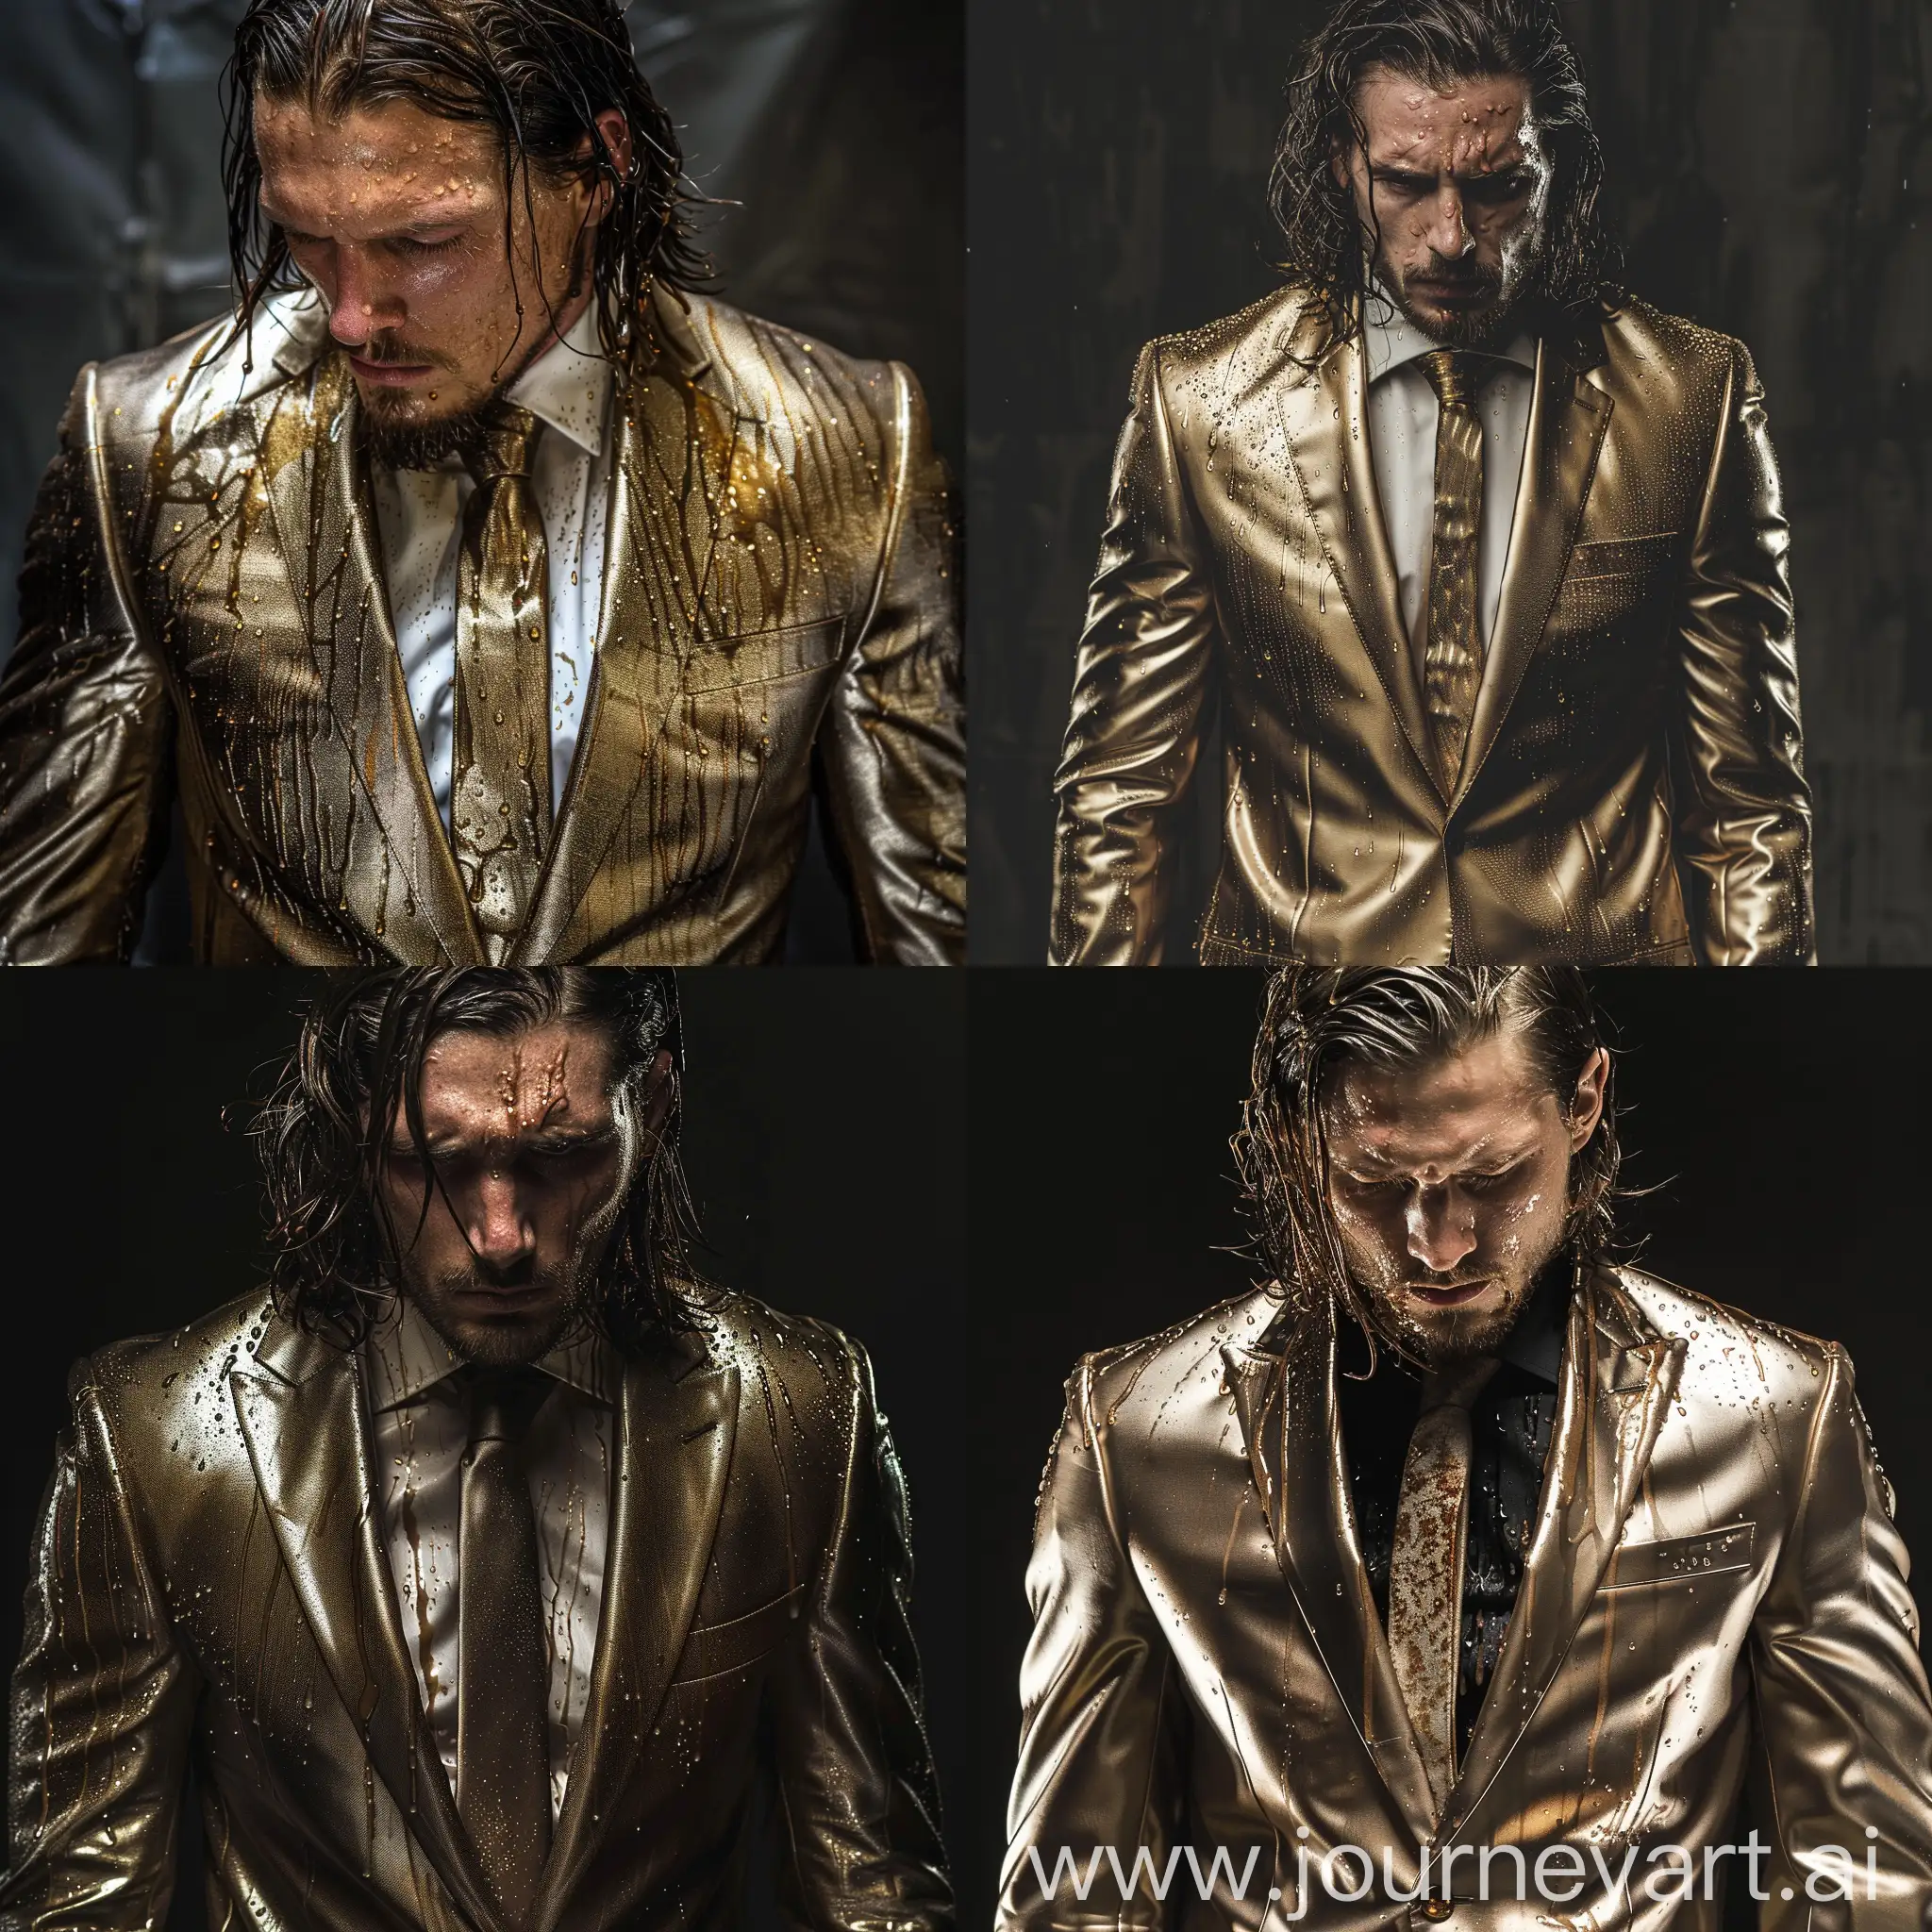 Sweaty-British-Conservative-Man-in-Tight-Metallic-Gold-Suit-and-Tie